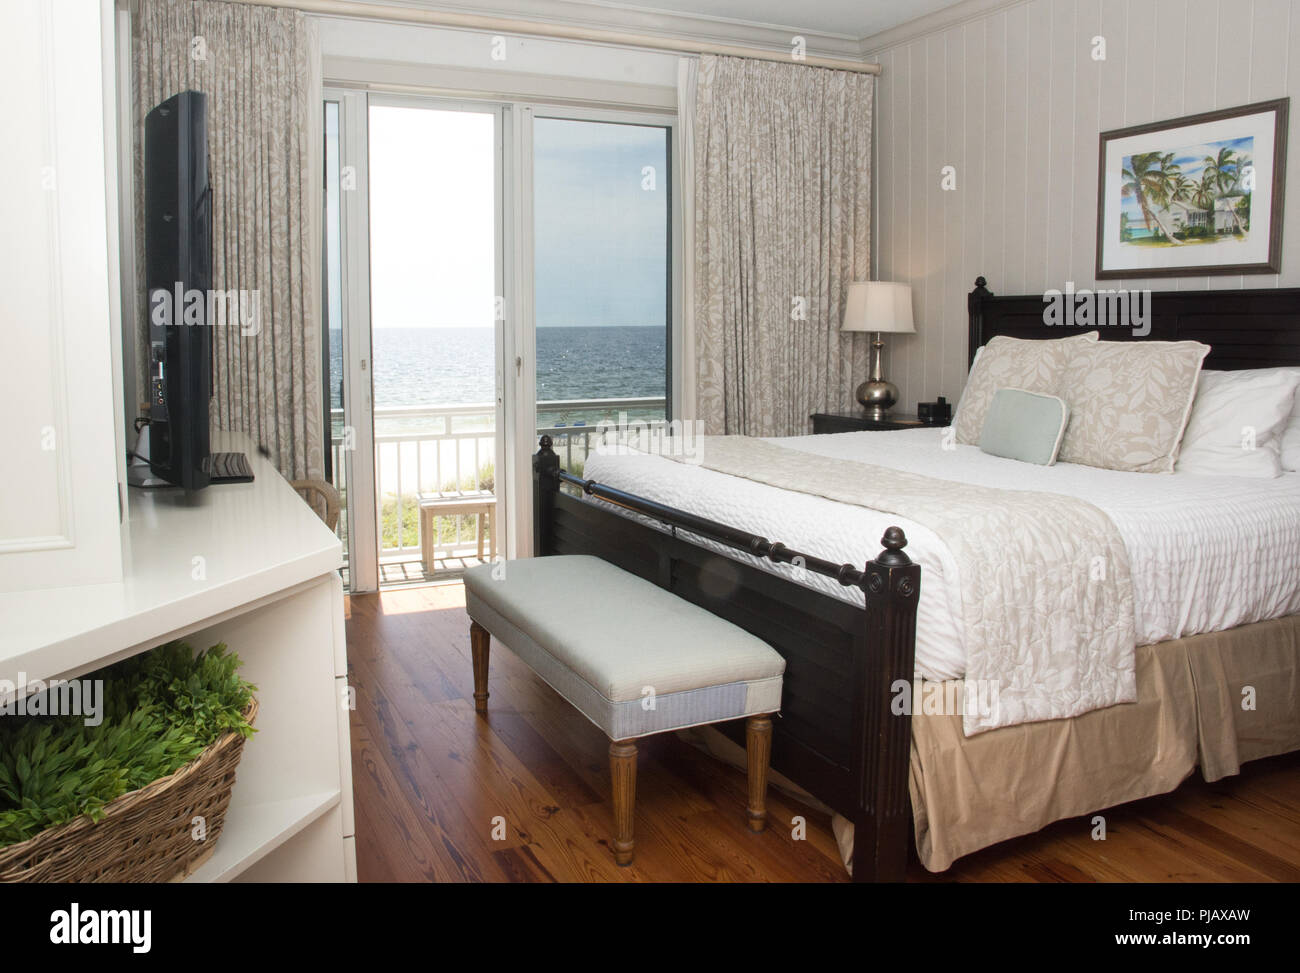 An interior shot of a bedroom with a balcony that overlooks the ocean. Stock Photo